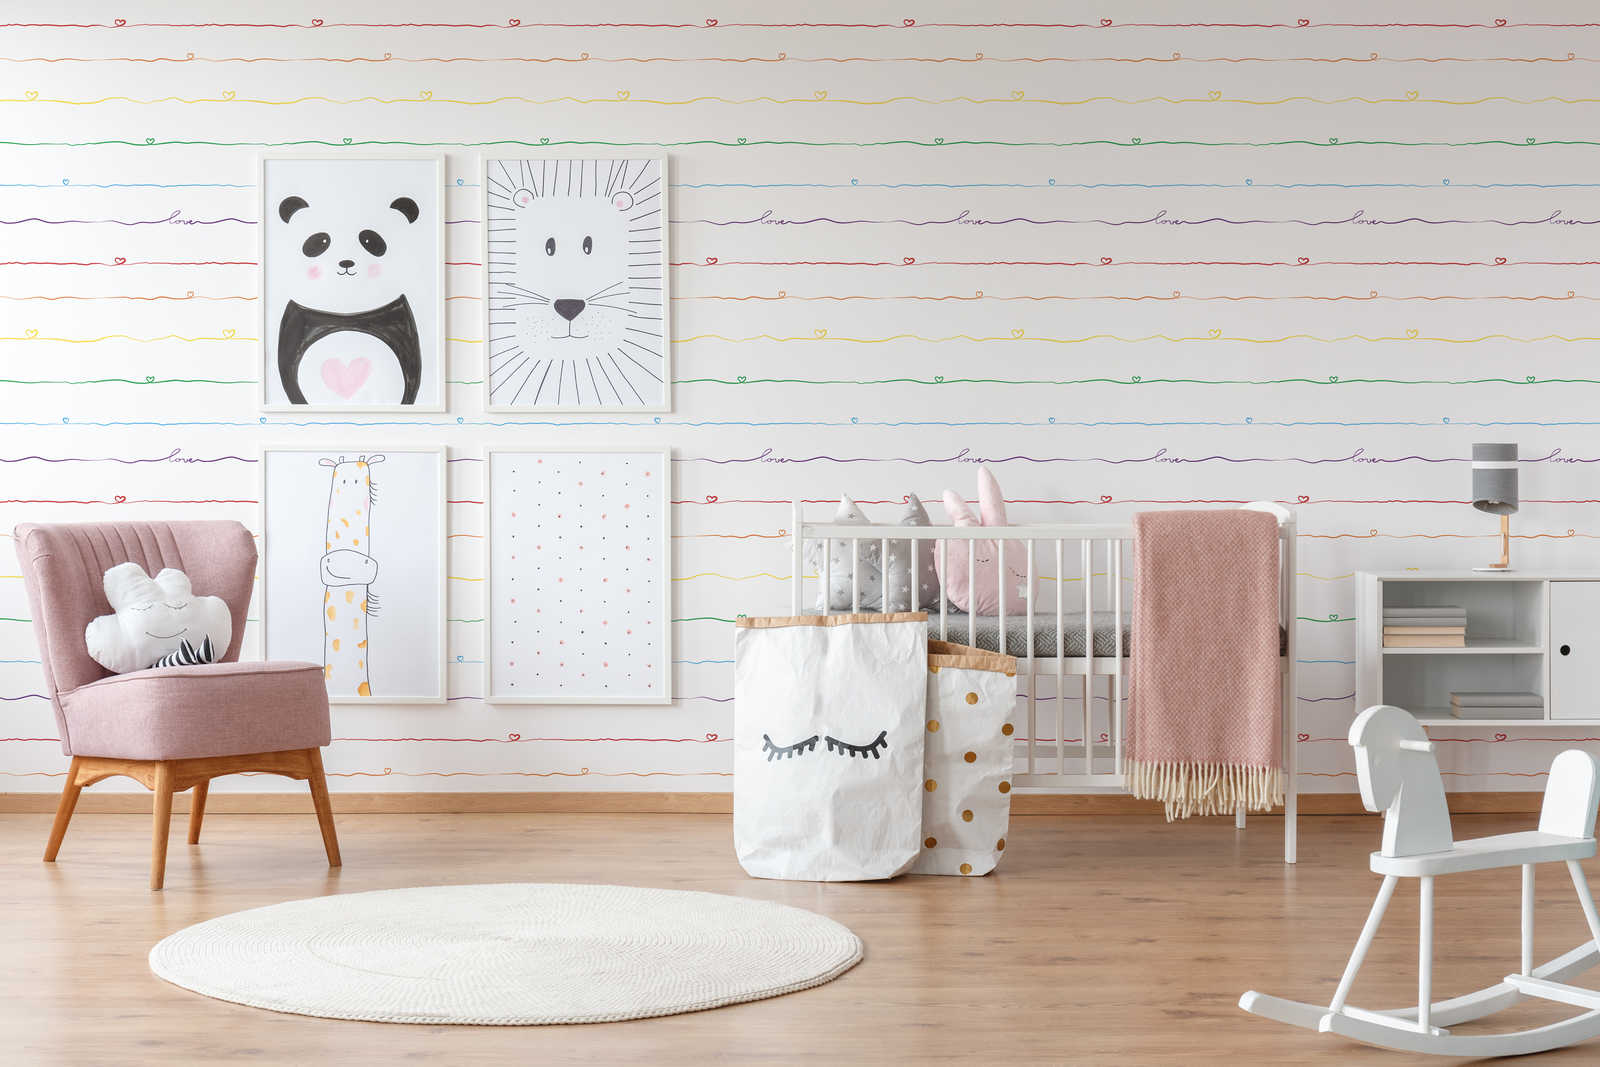             Striped nursery wallpaper with heart - colourful, white, red
        